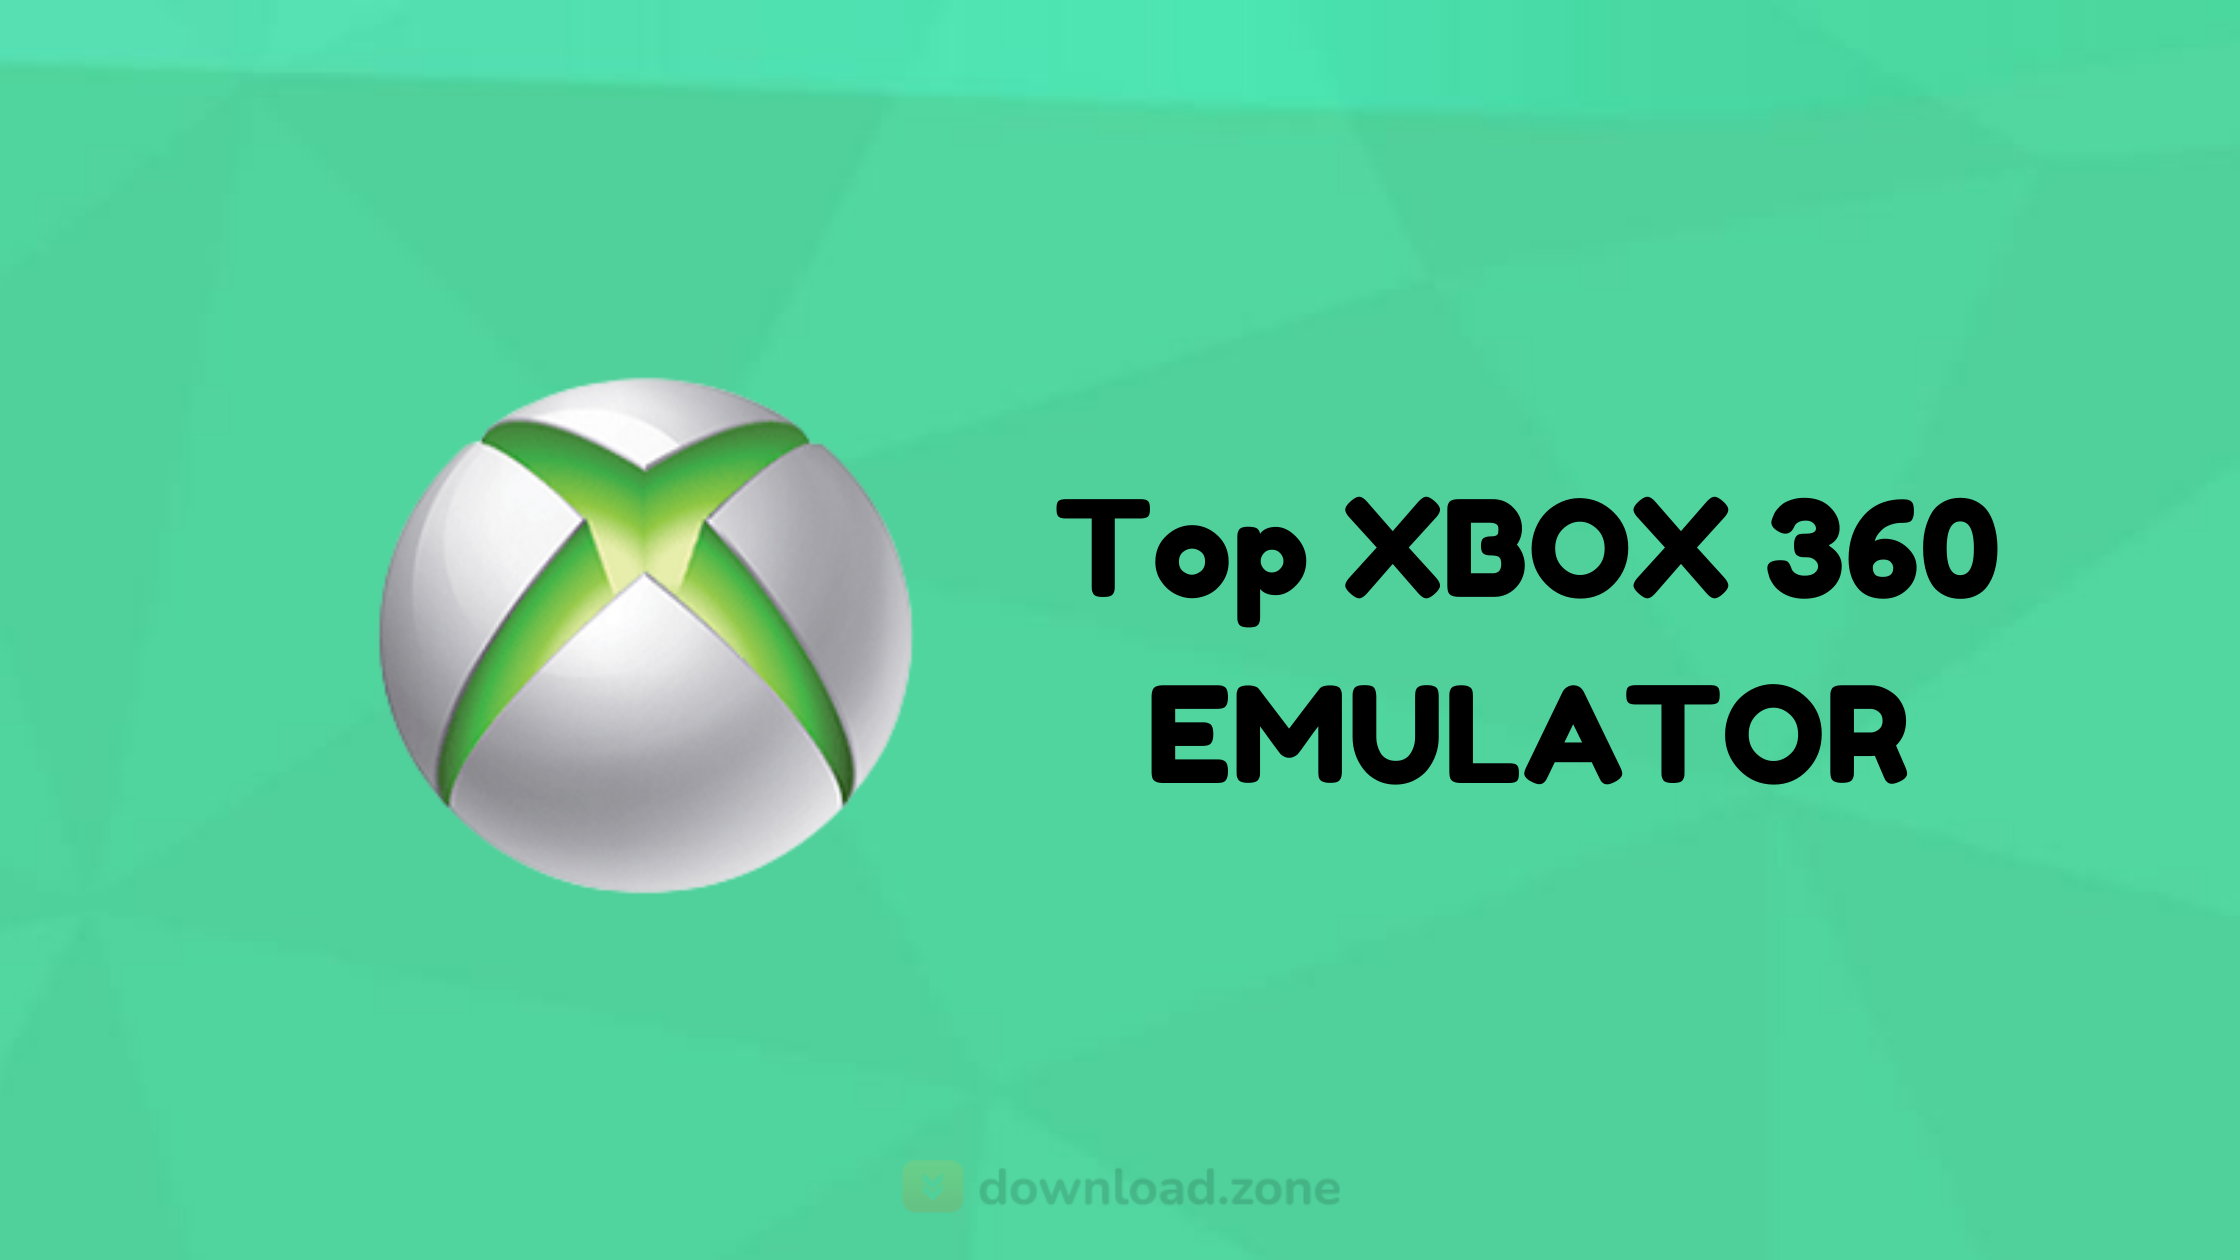 how to get a free xbox 360 emulator for pc